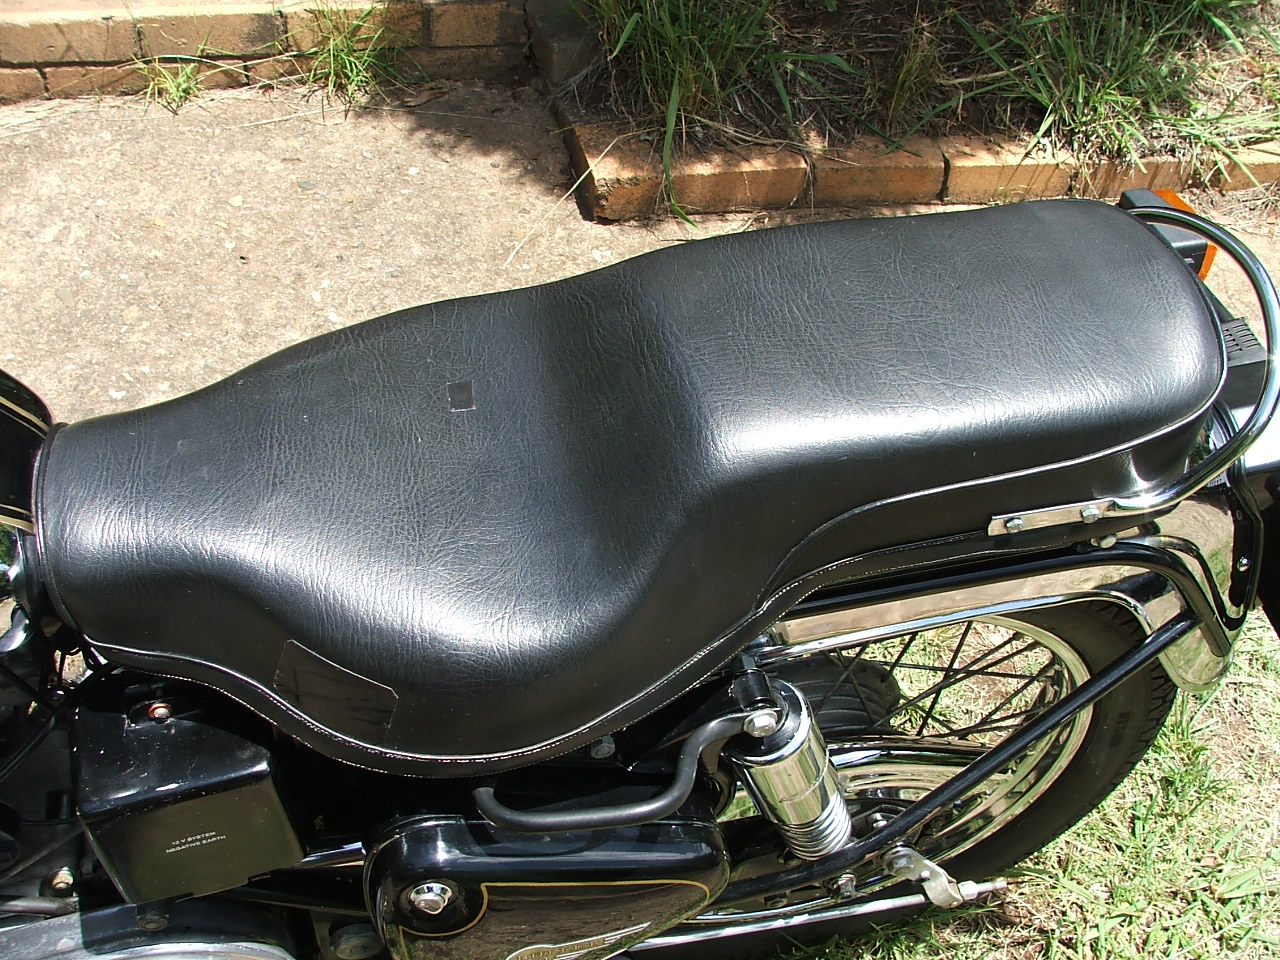 Left, top view of seat condition, 350 enfield